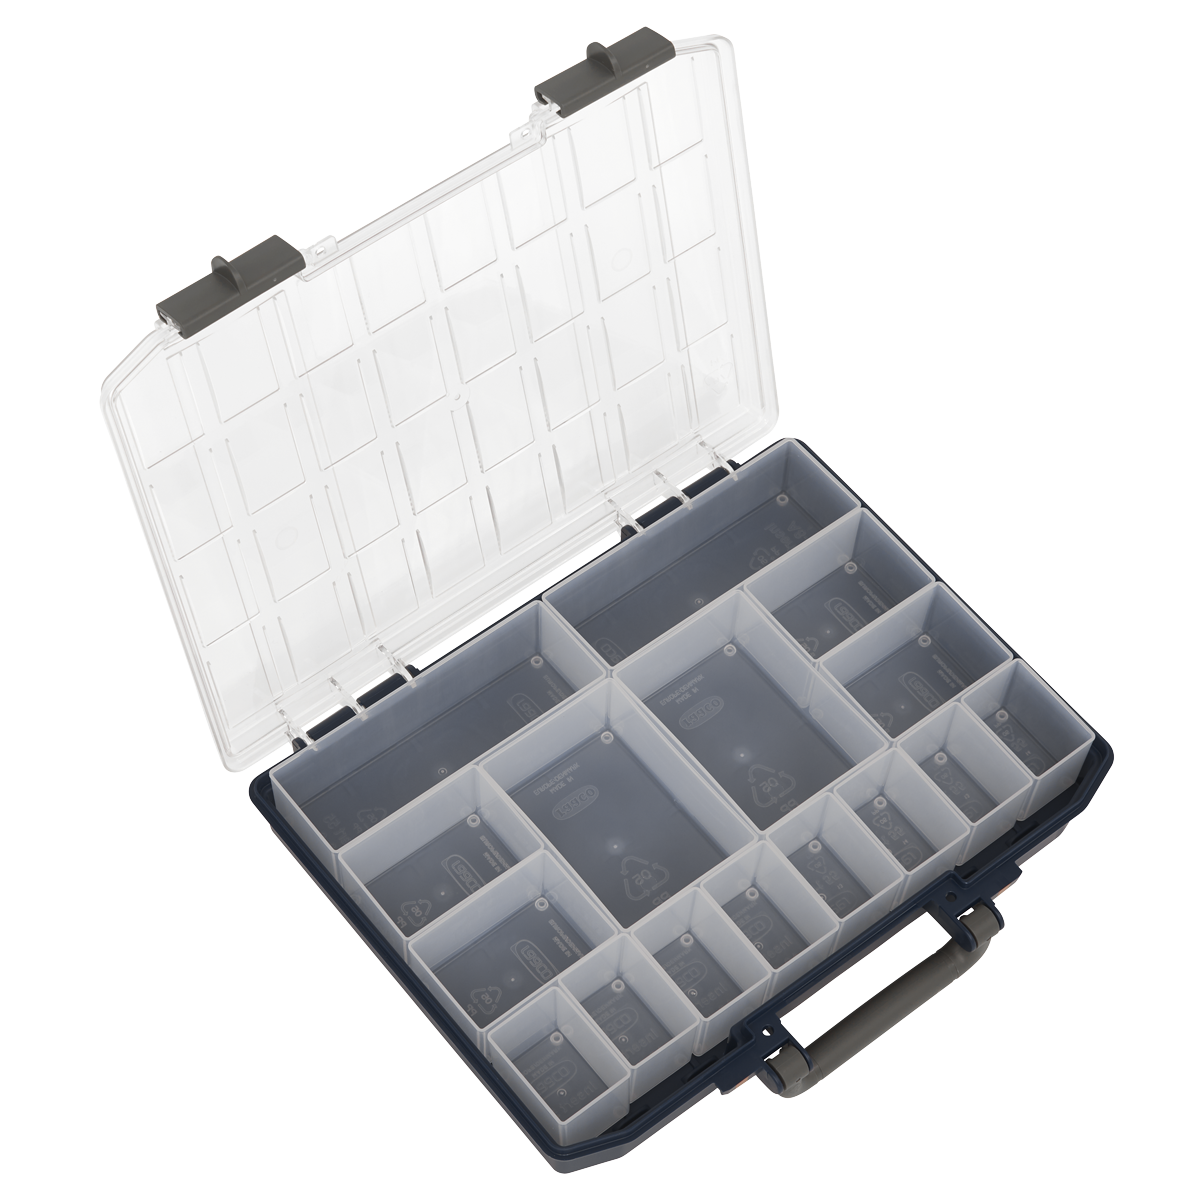 Sealey storage for small fixing, screws, fuses and components